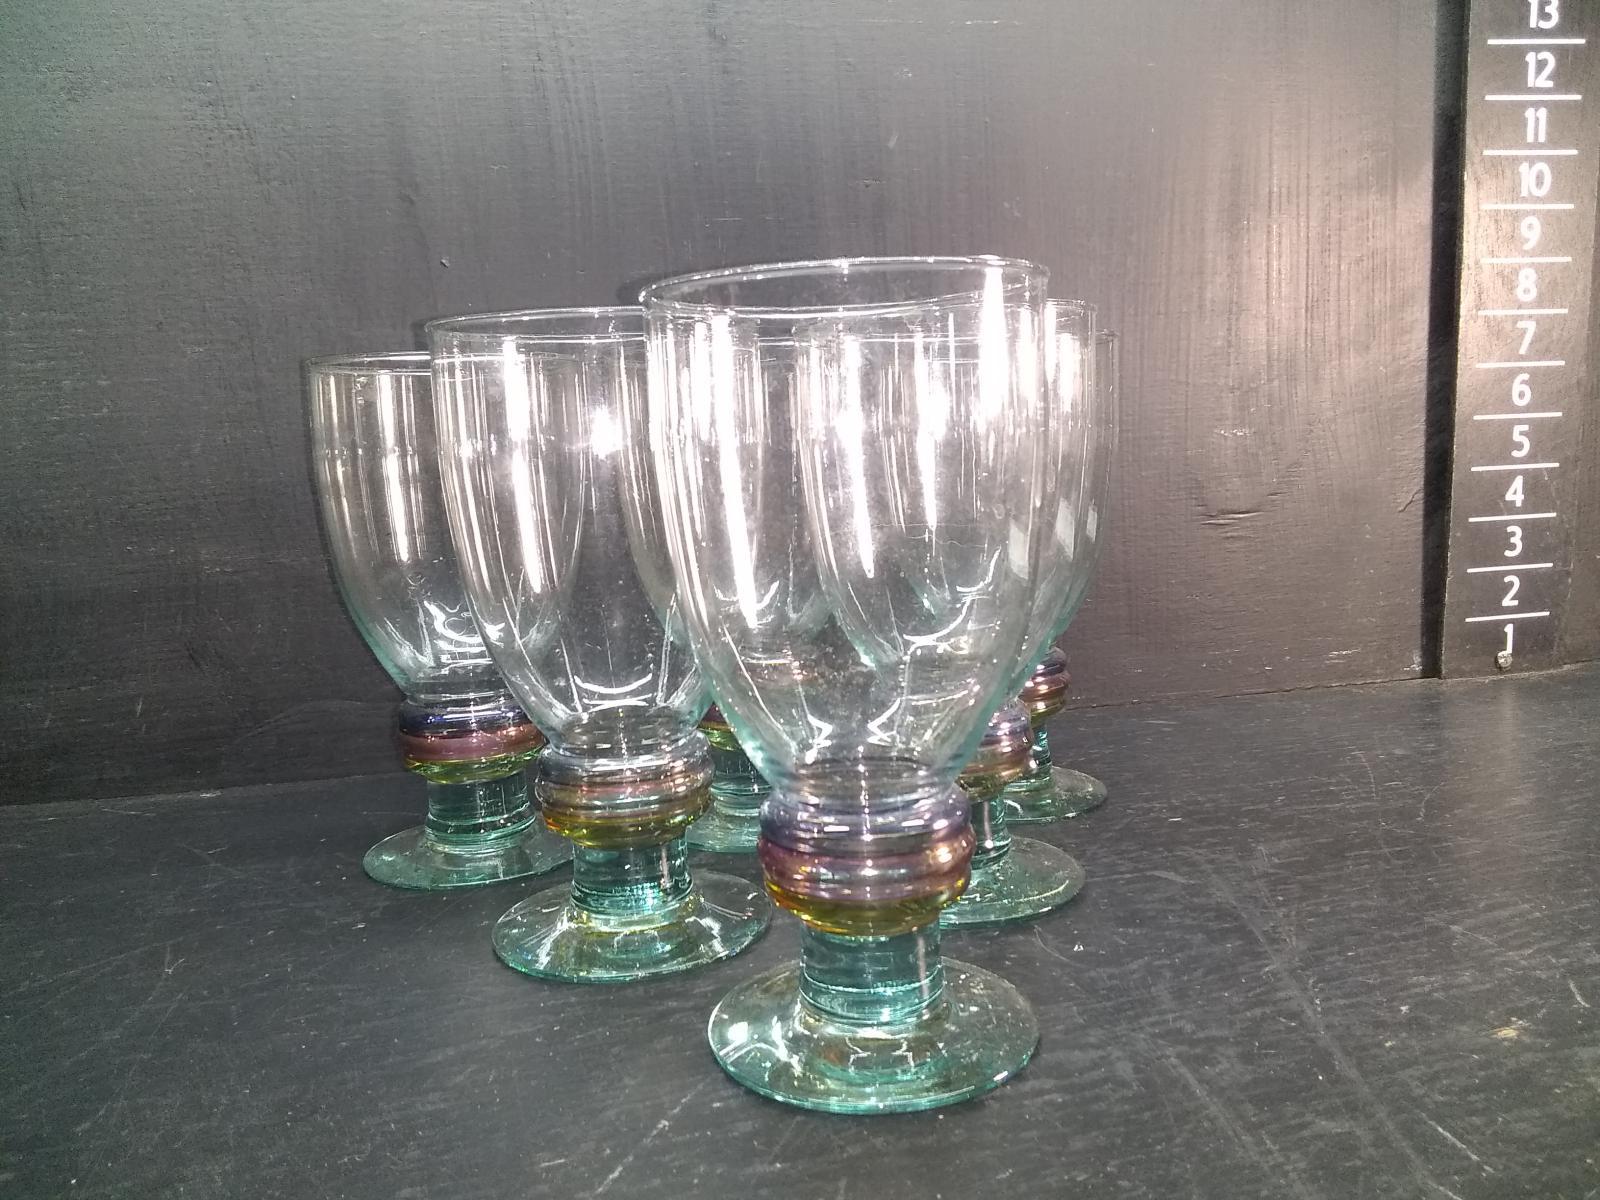 Collection of (6) Stemmed Glassware with Iridescent Ribbed Details